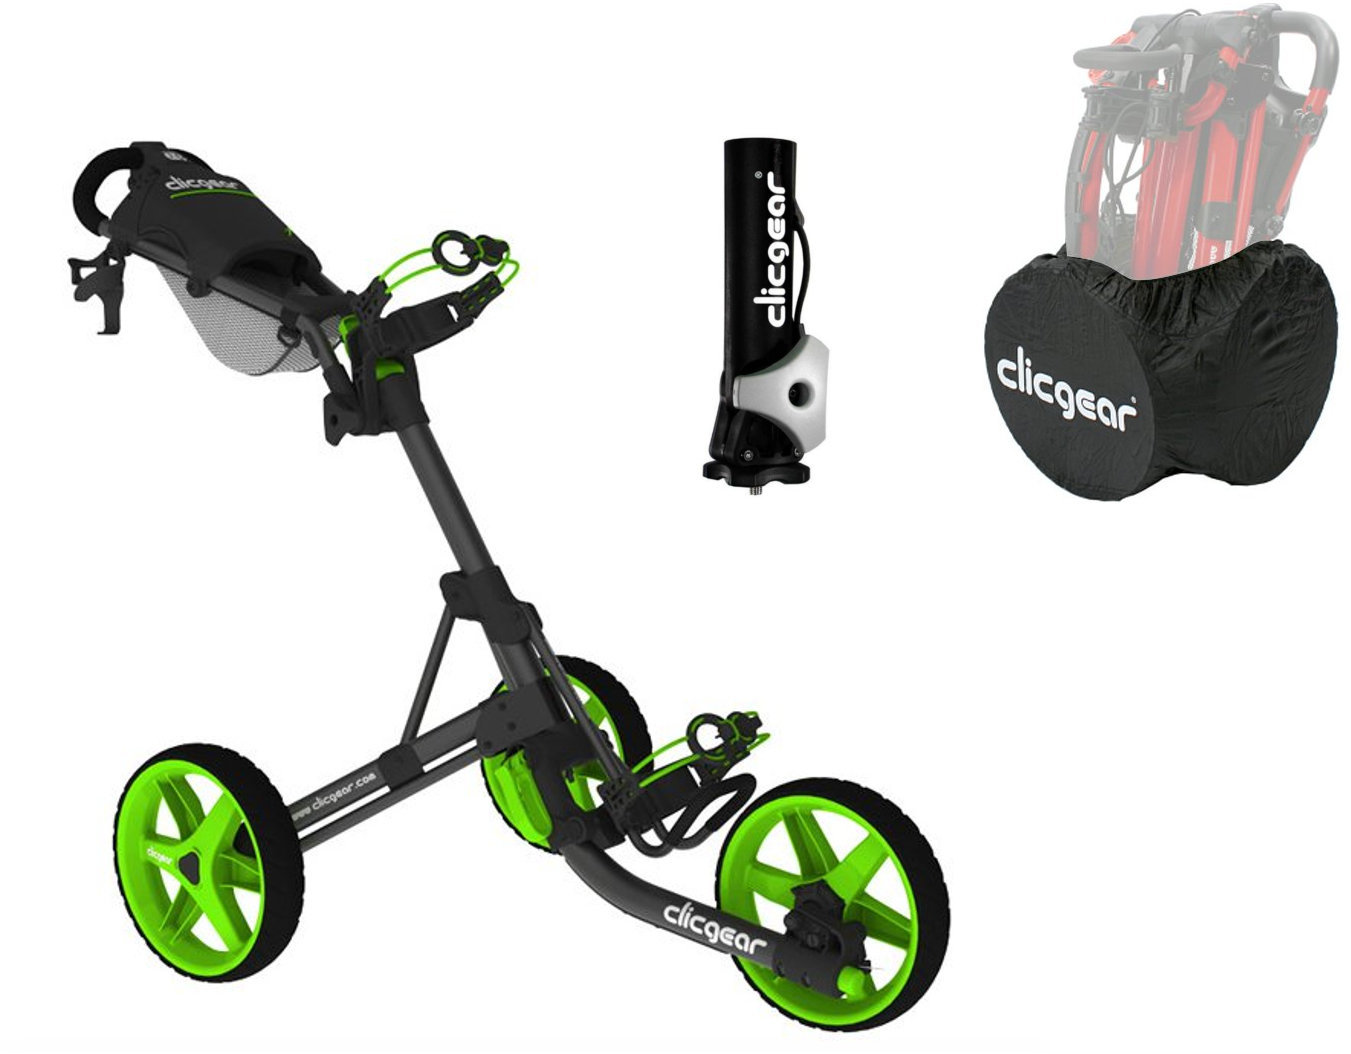 Manual Golf Trolley Clicgear 3.5+ Charcoal/Lime DELUXE SET Manual Golf Trolley